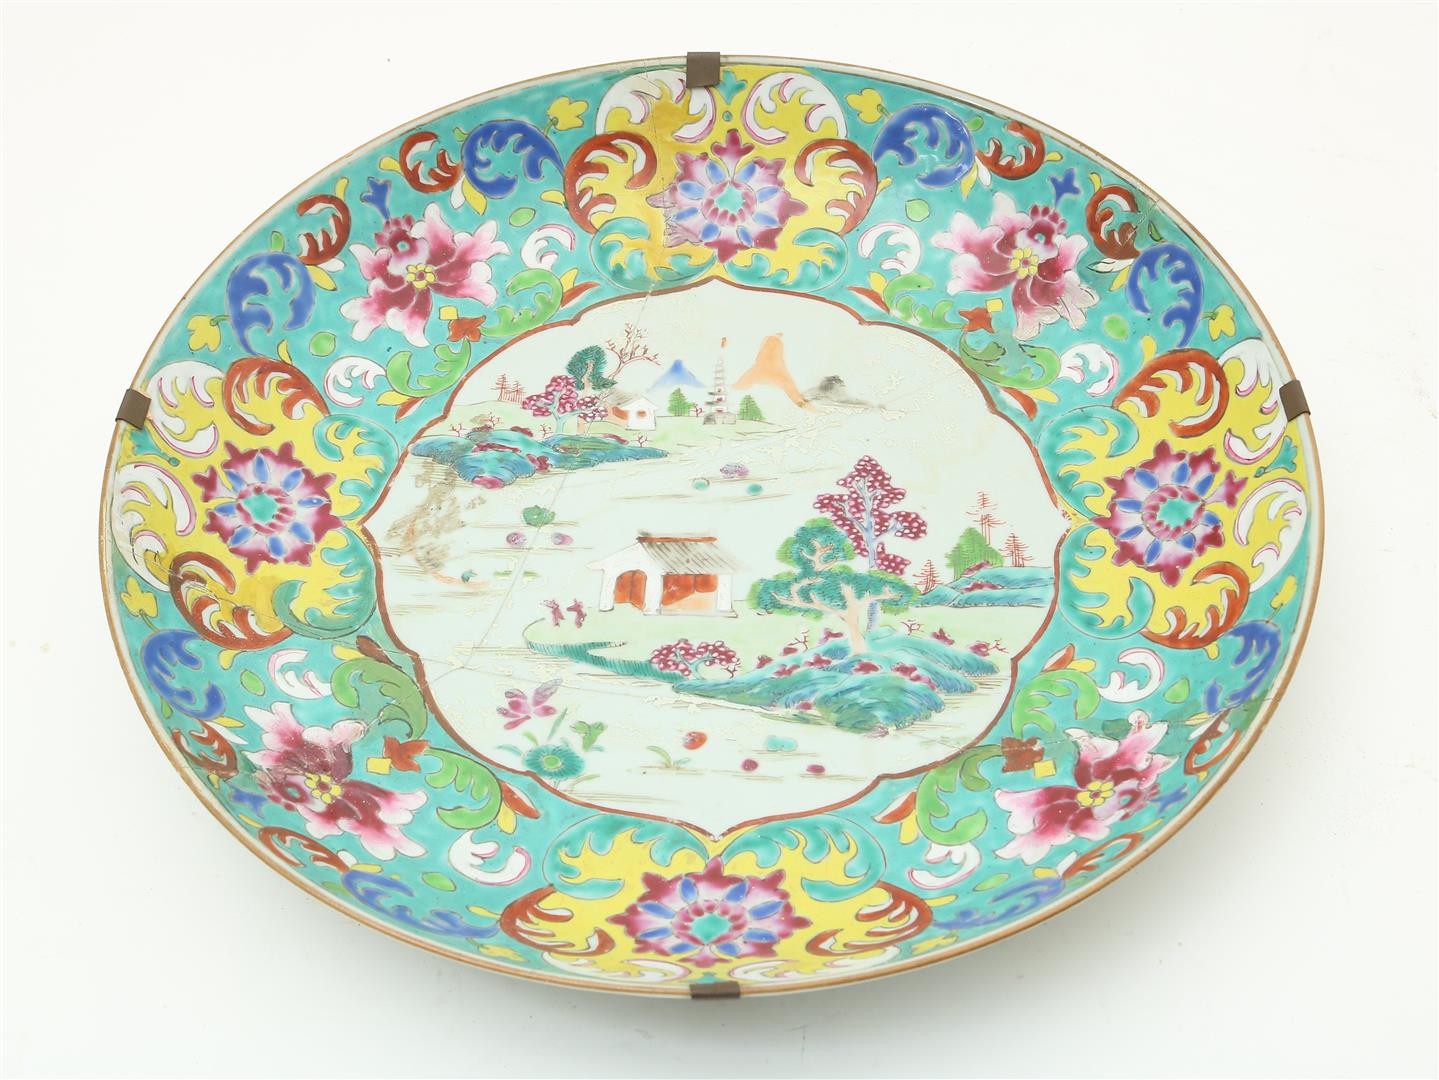 Porcelain famille rose dish with central landscape decor and enamel edge decoration with flowers and